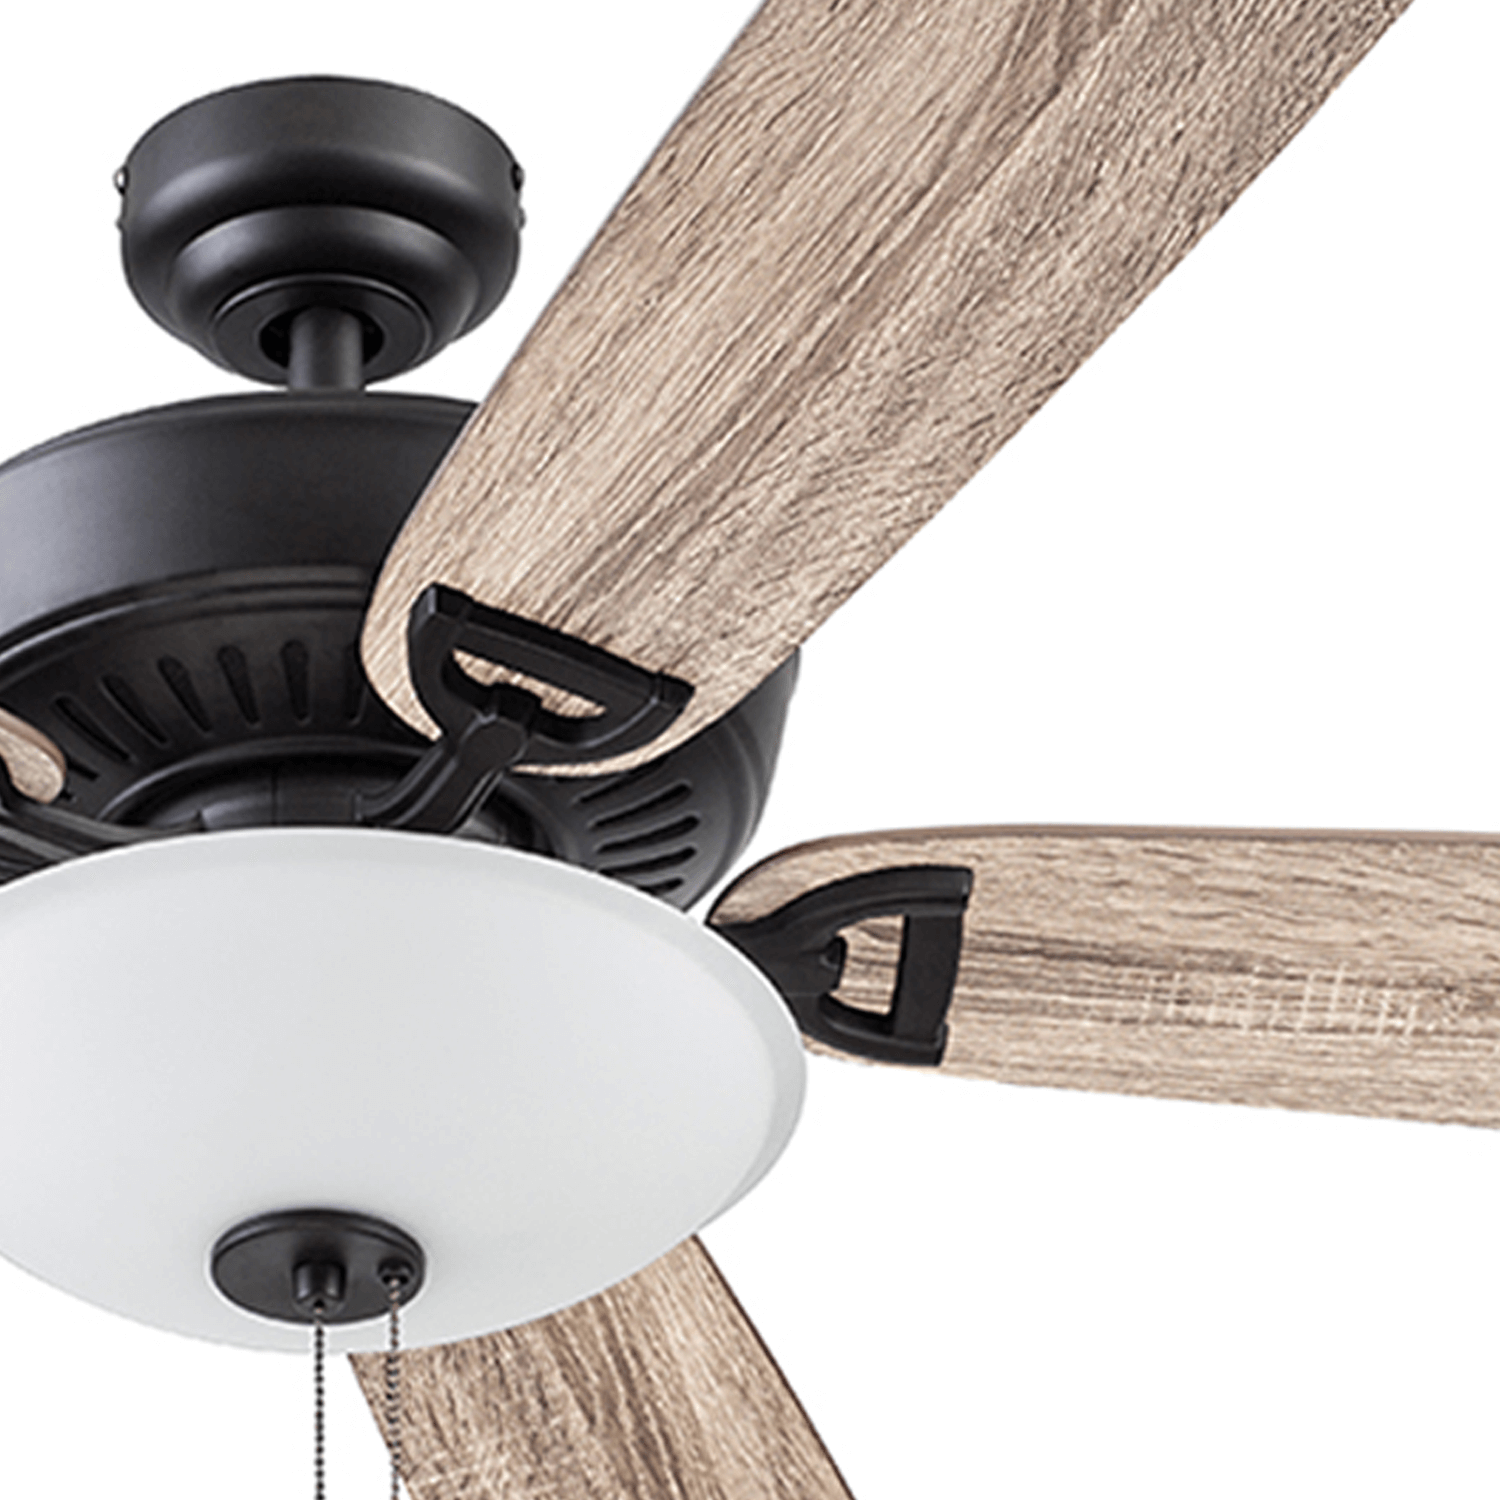 52 Inch Montlake, Espresso Bronze, Pull Chain, Ceiling Fan by Prominence Home